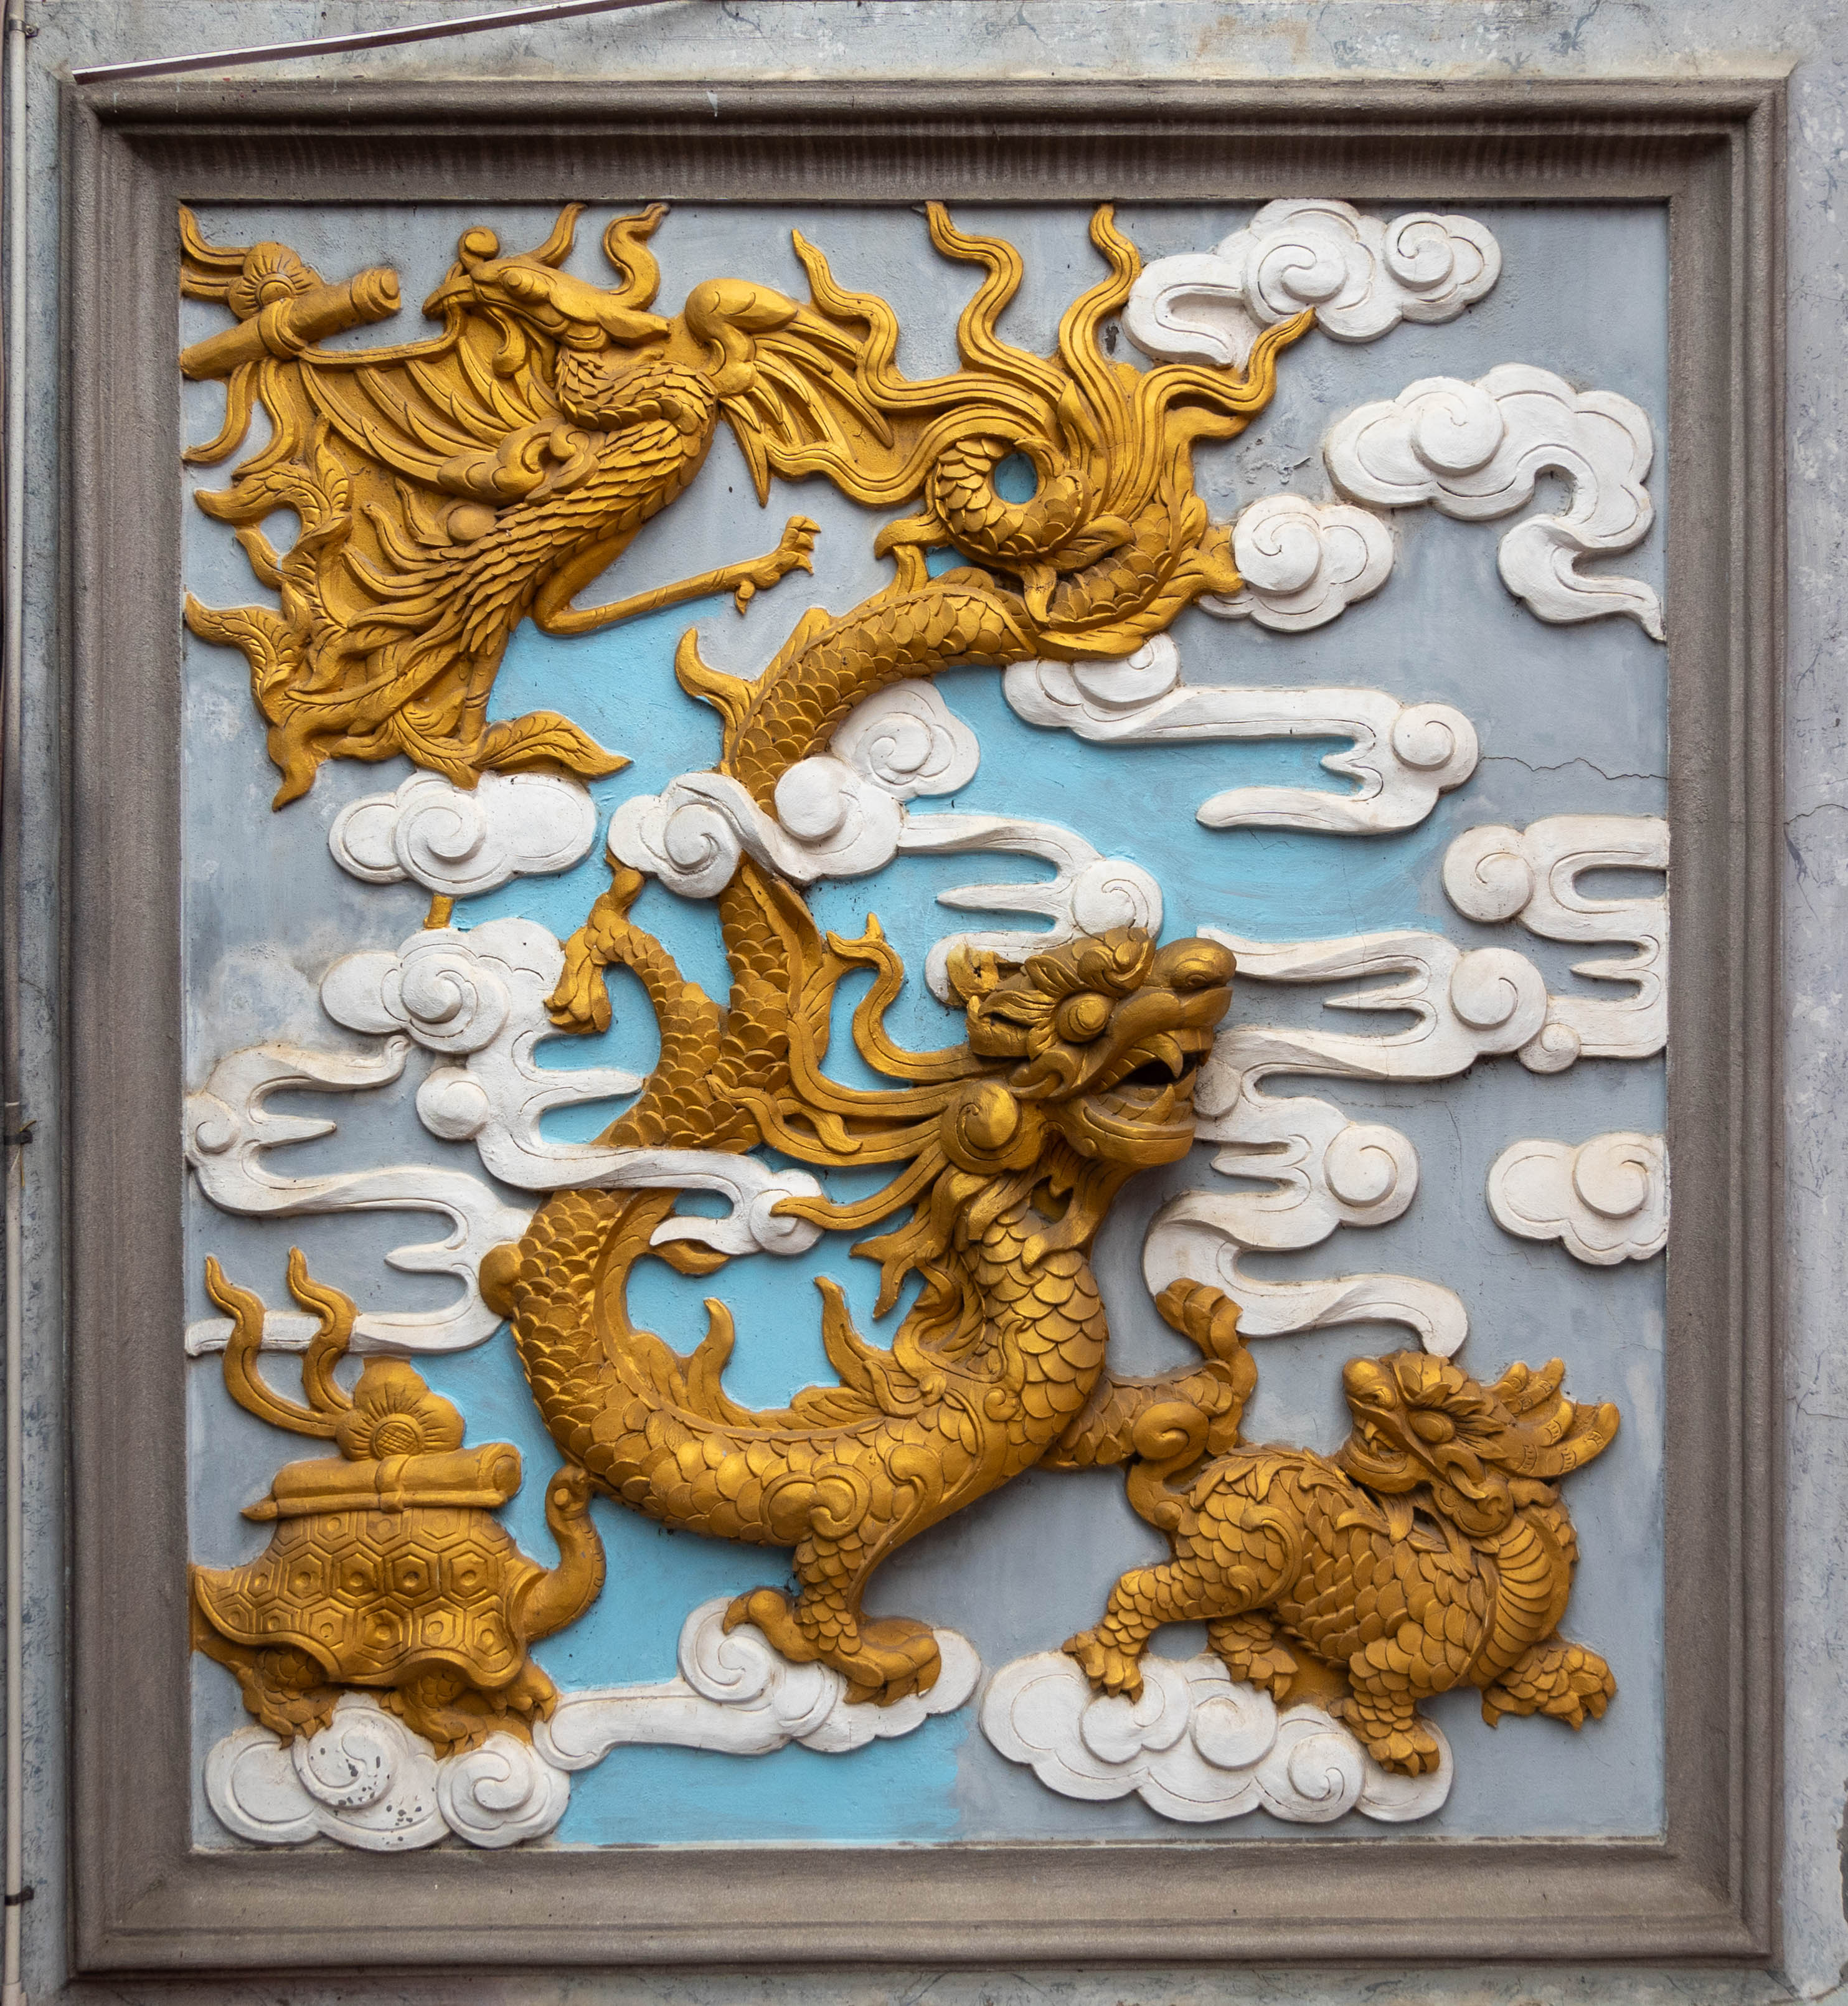 plaque showing dragon in center tortoise in lower left, unicorn in lower right, and phoenix in upper left